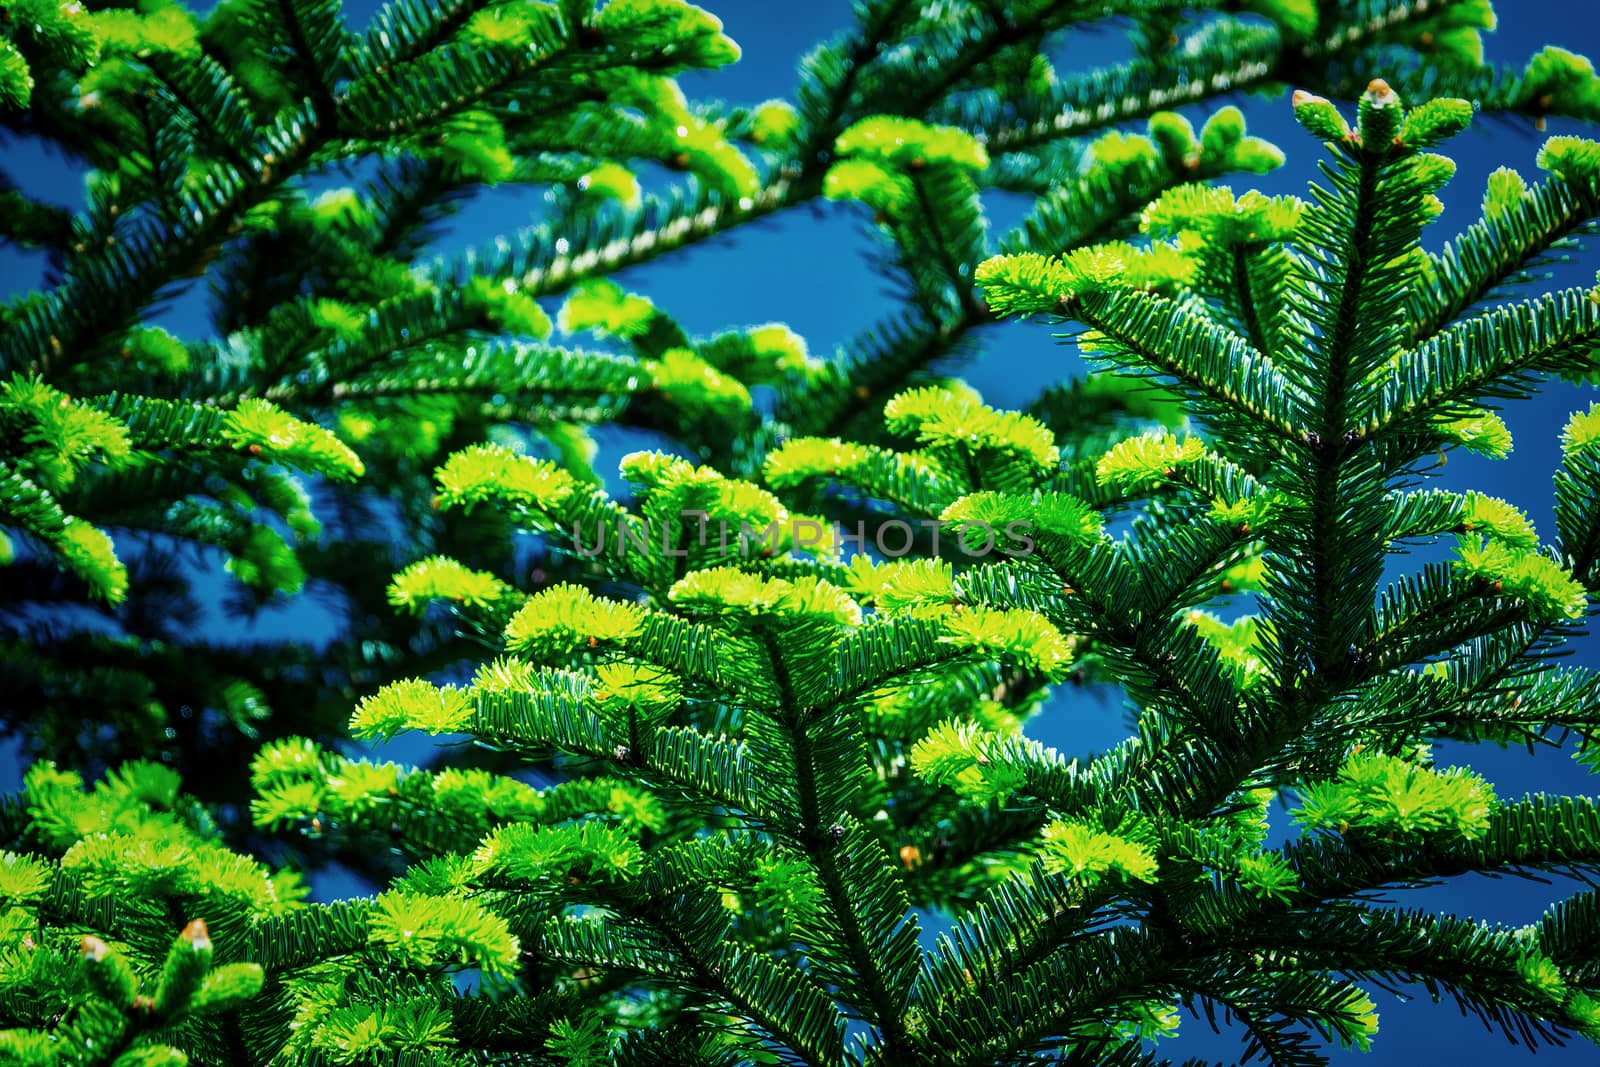 Low angle view of a colorful conifer